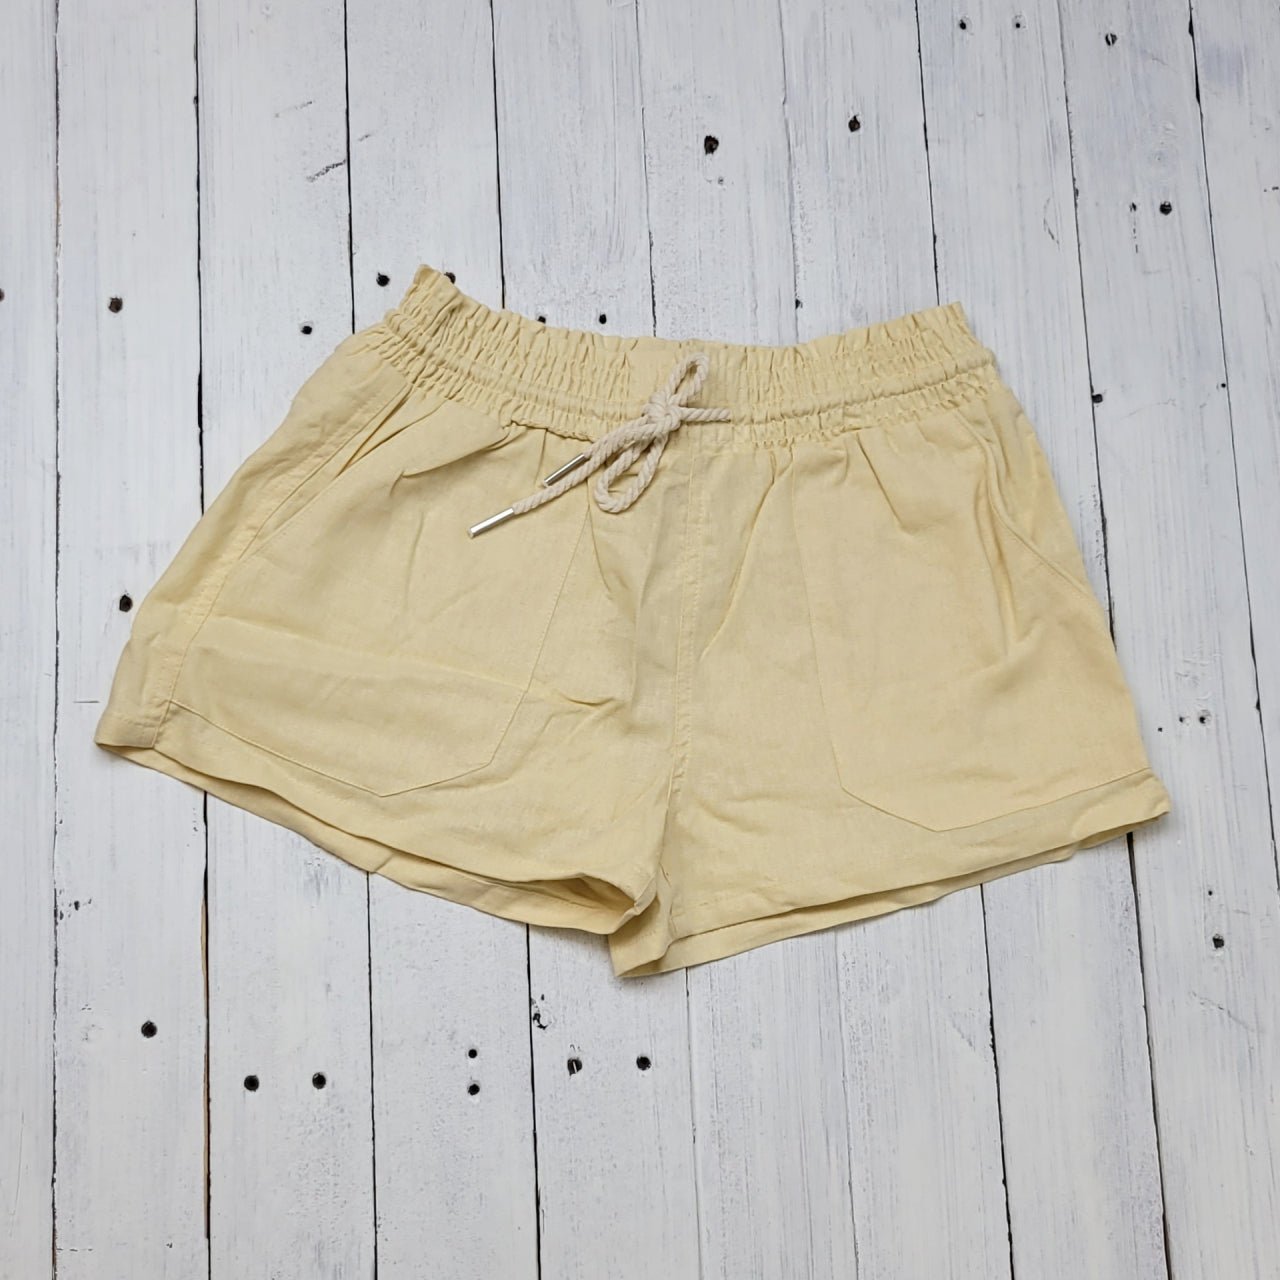 Evie Rope Drawstring Summer Shorts - The Graphic Tee